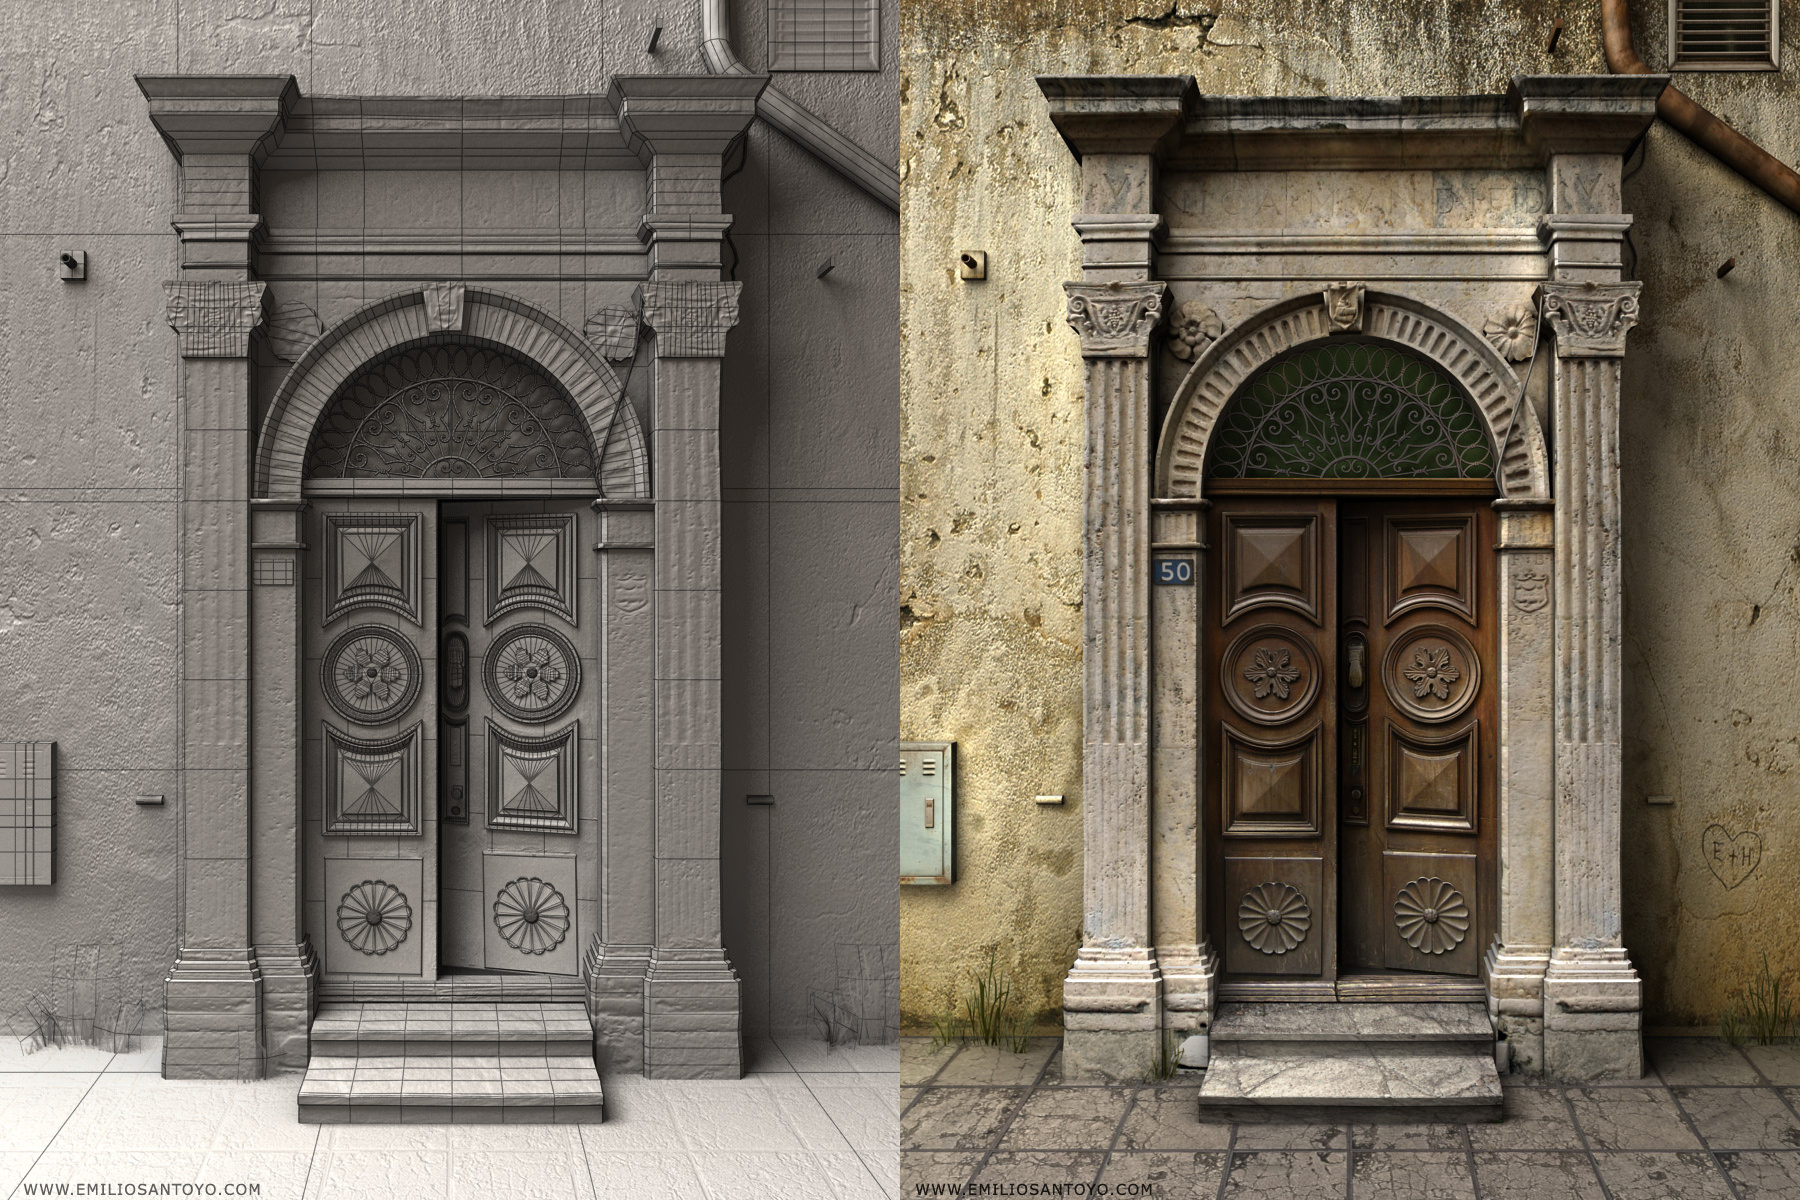 Doorway Scene. Software used 3ds Max, PhotoShop, and Zbrush.